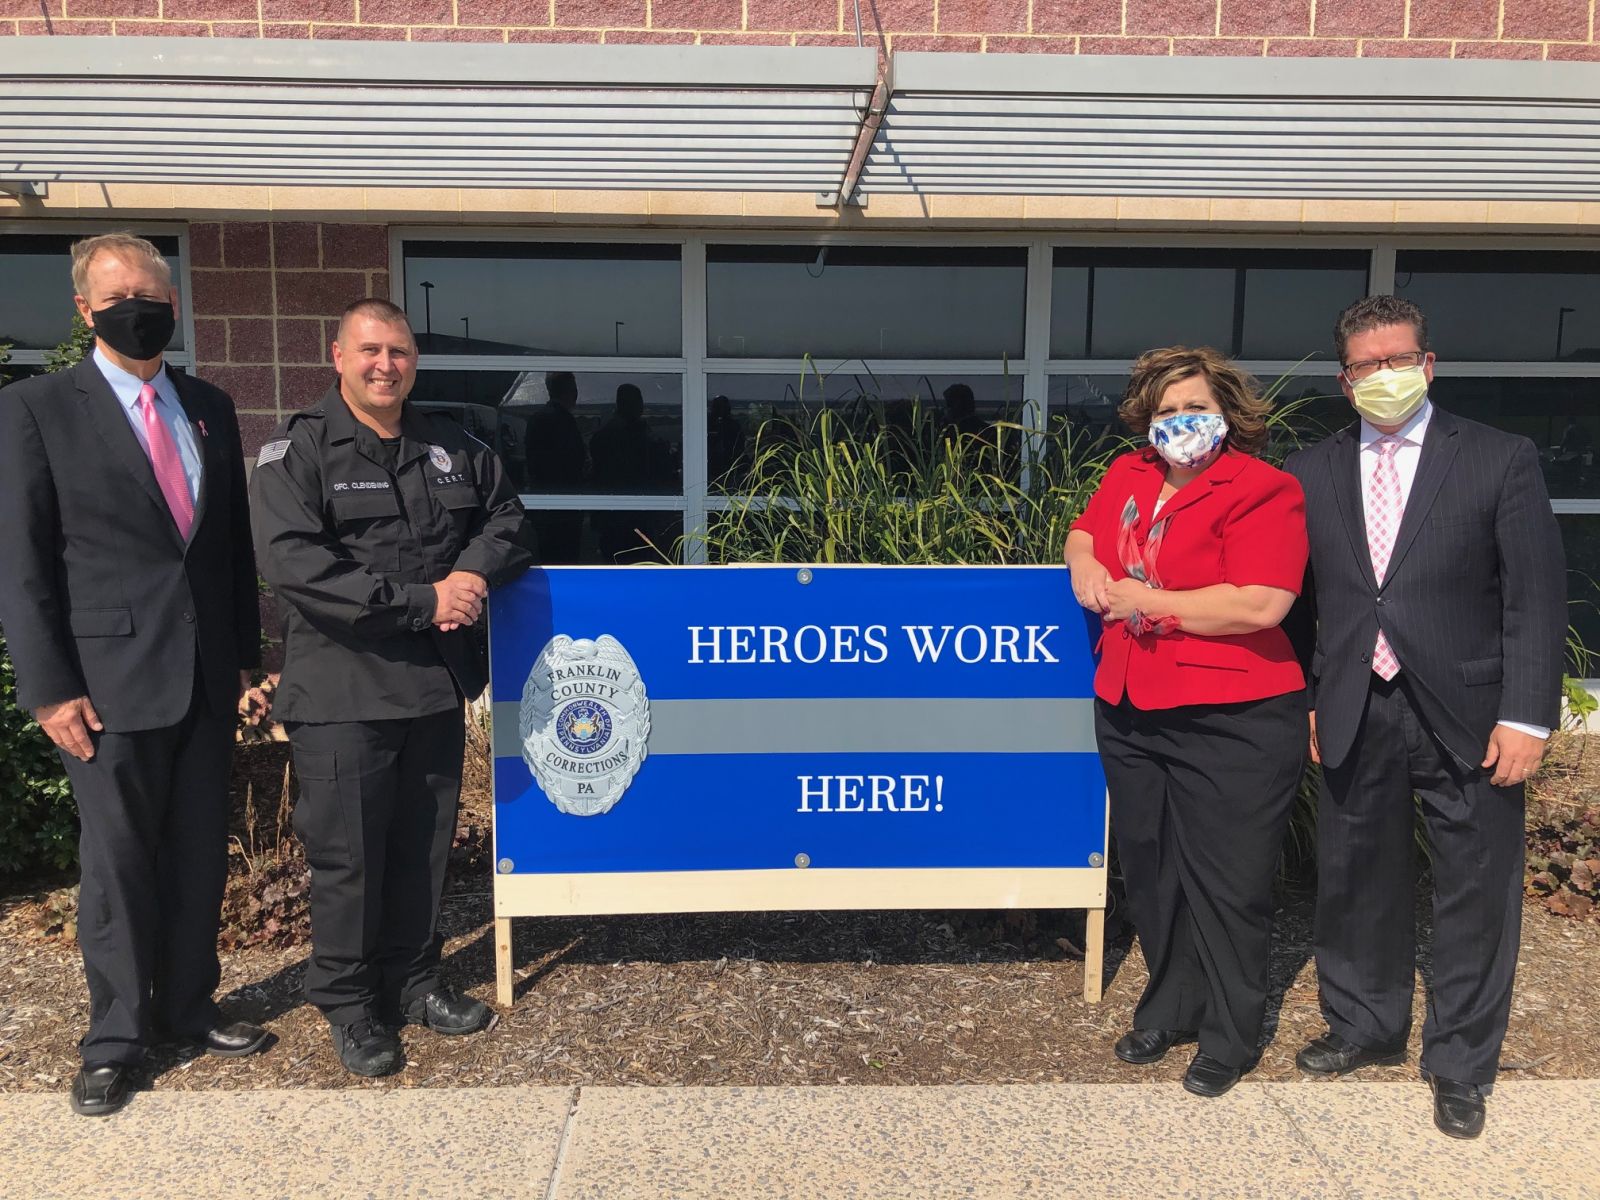 Commissioner Bob Ziobrowski, Correctional Officer Randy Clendening, Franklin County Jail Business Manager Tammy Zook, and Commissioner Chairman Dave Keller.